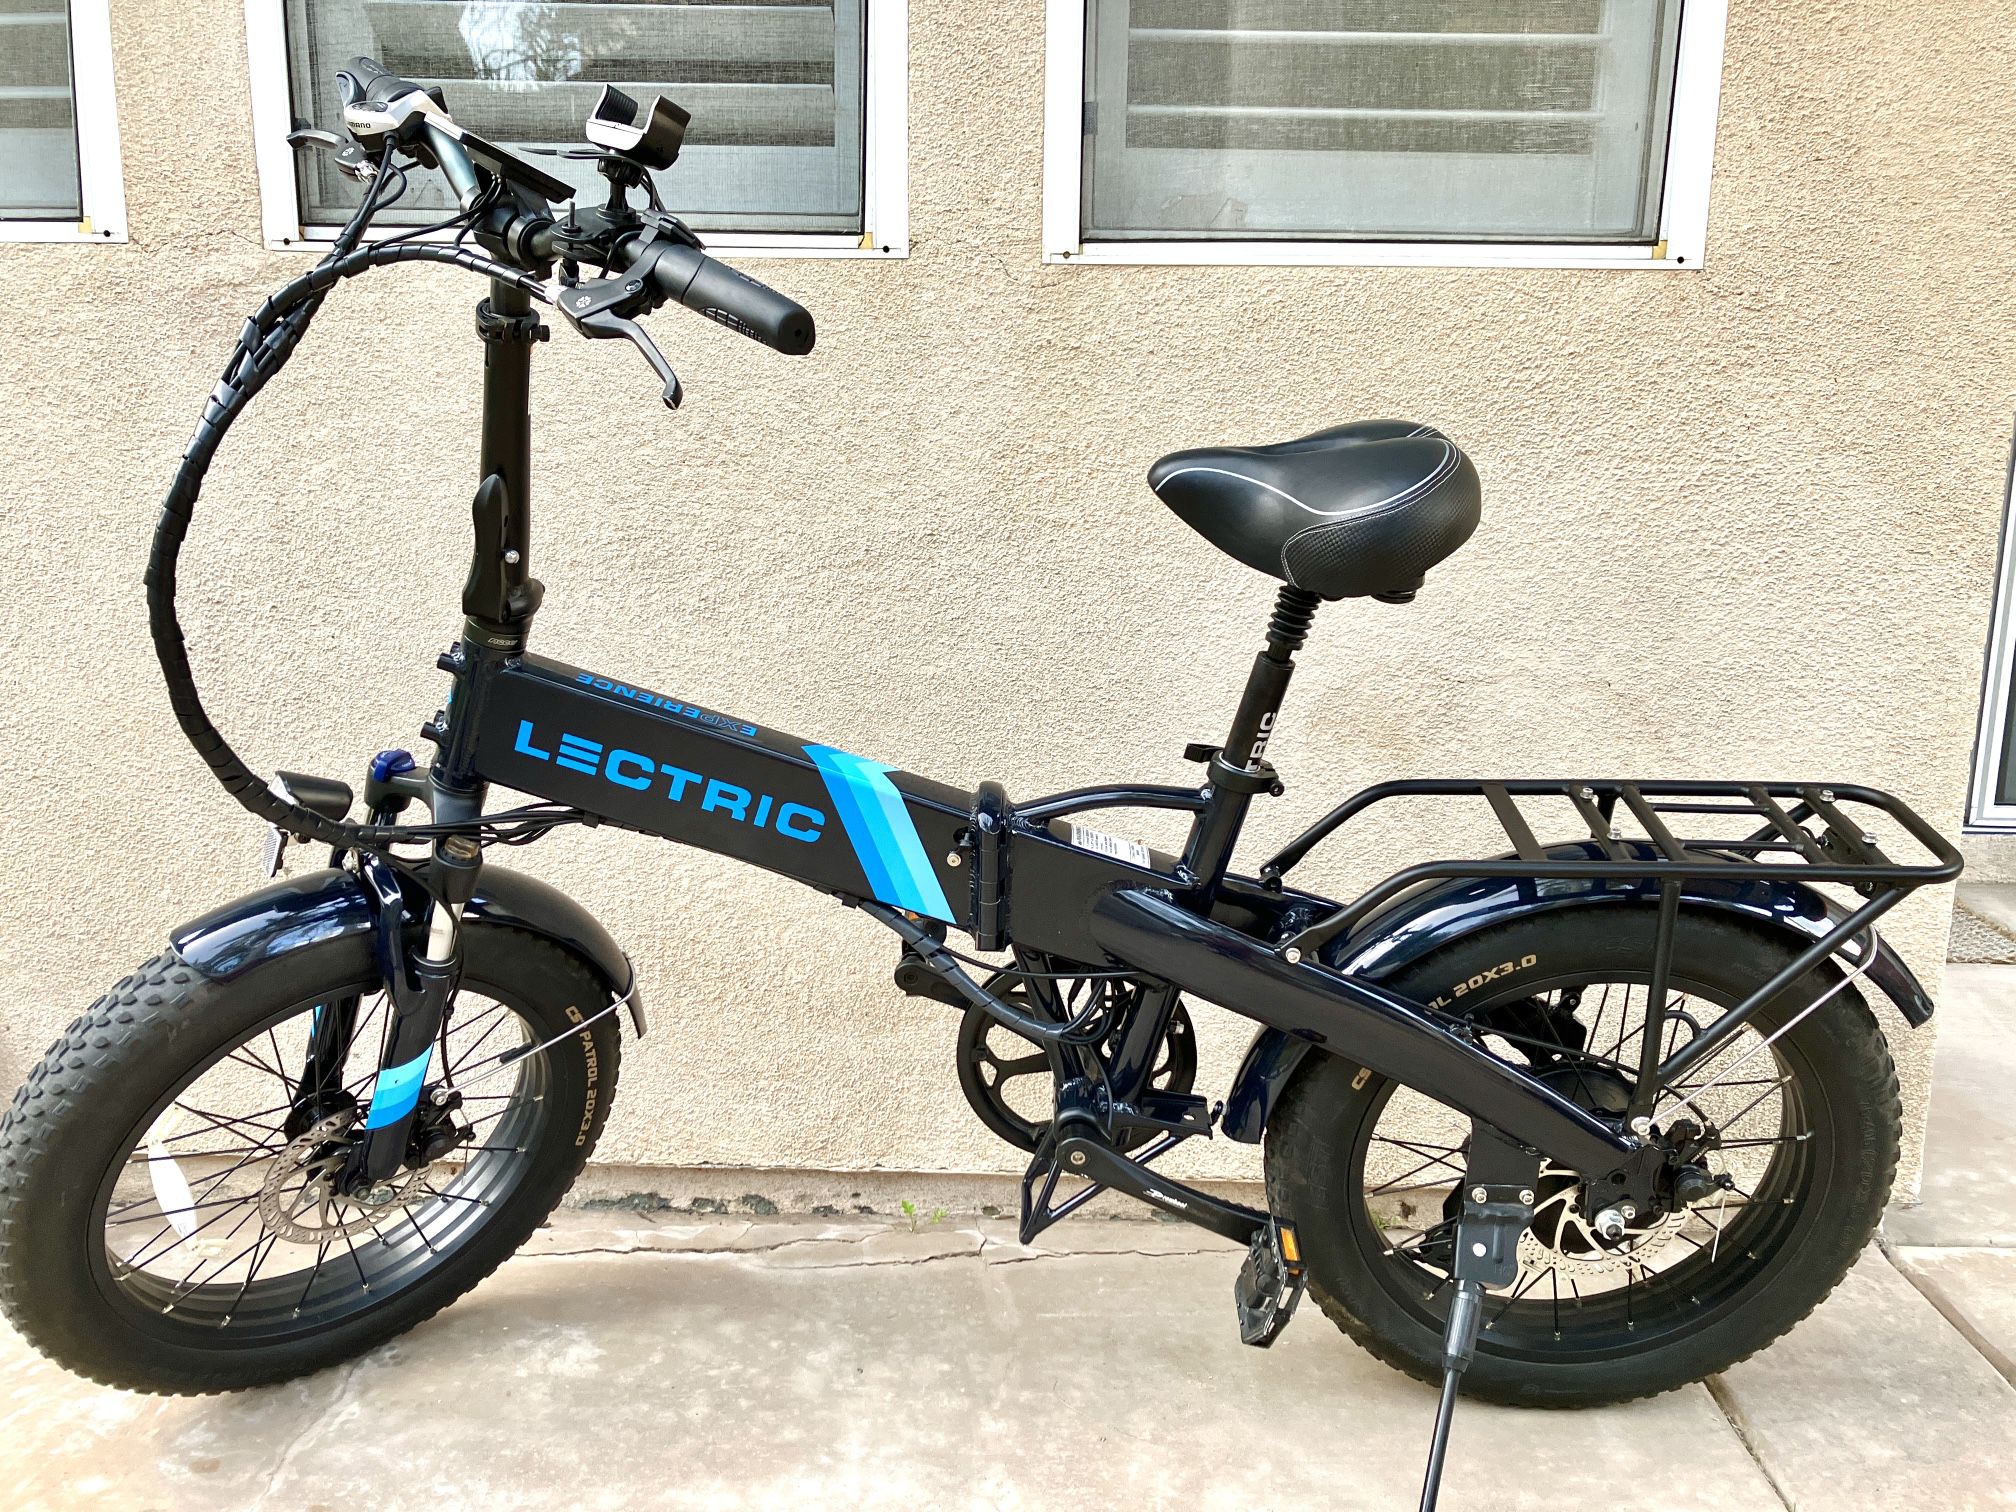 Lectric XP 2.0 Folding Ebike - Very Good Condition - $595 - Under 250 Miles